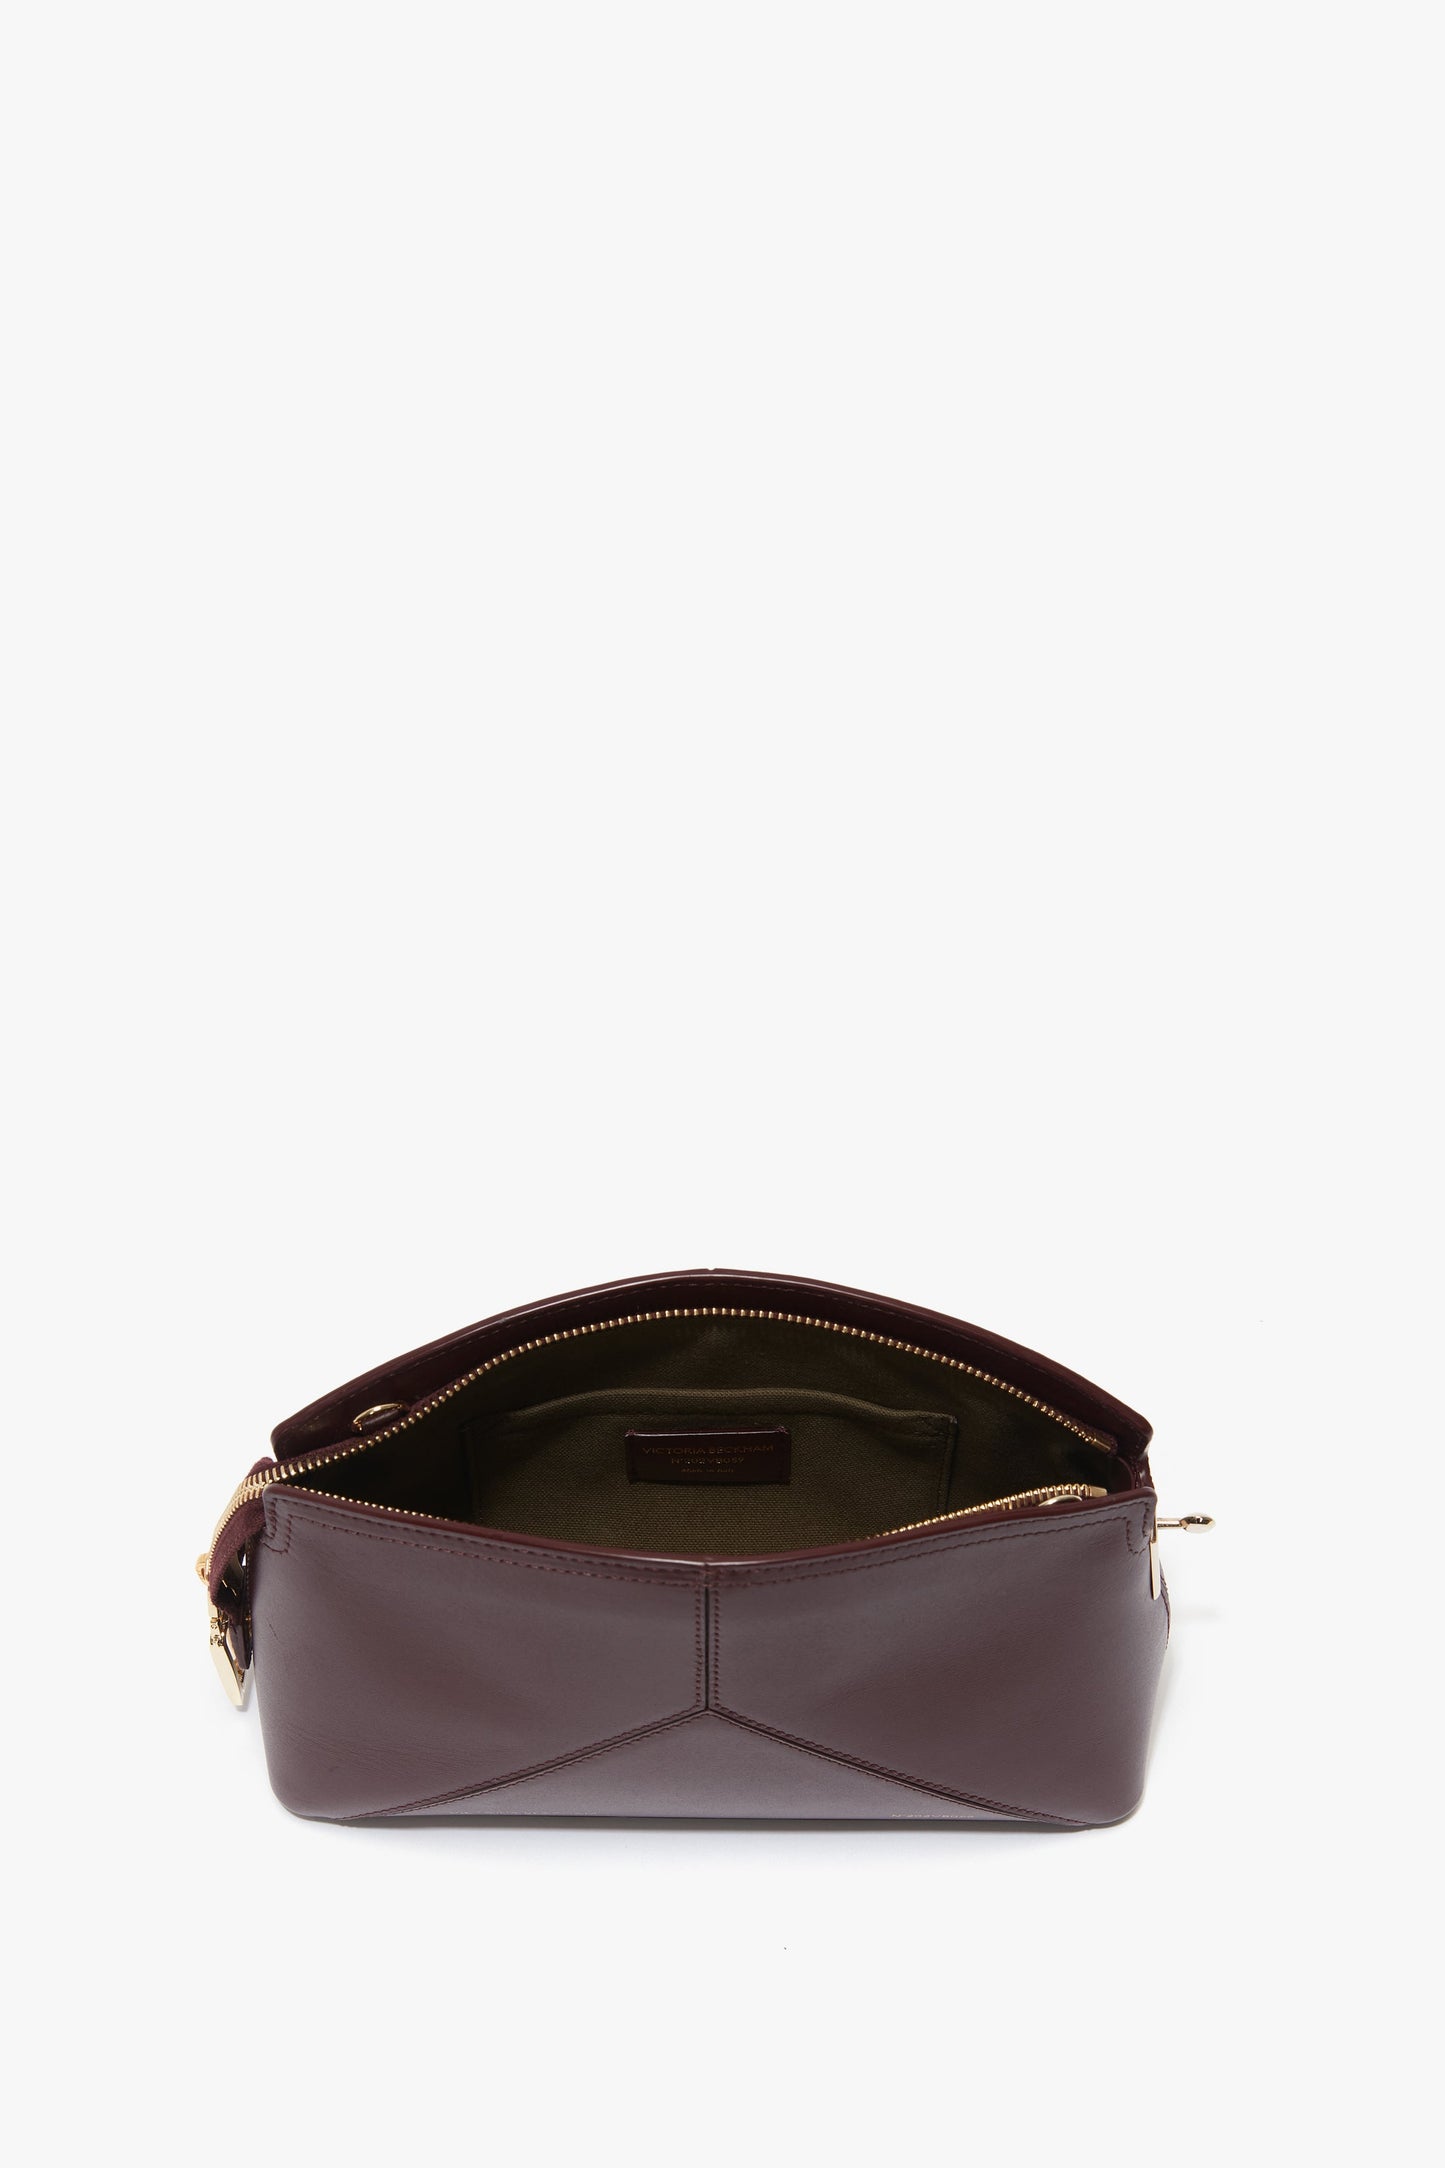 Brown leather Victoria Beckham Victoria Crossbody Bag In Burgundy Leather with the top unzipped, revealing an inner compartment. The bag has a minimalist design with clean lines and no visible brand logos.